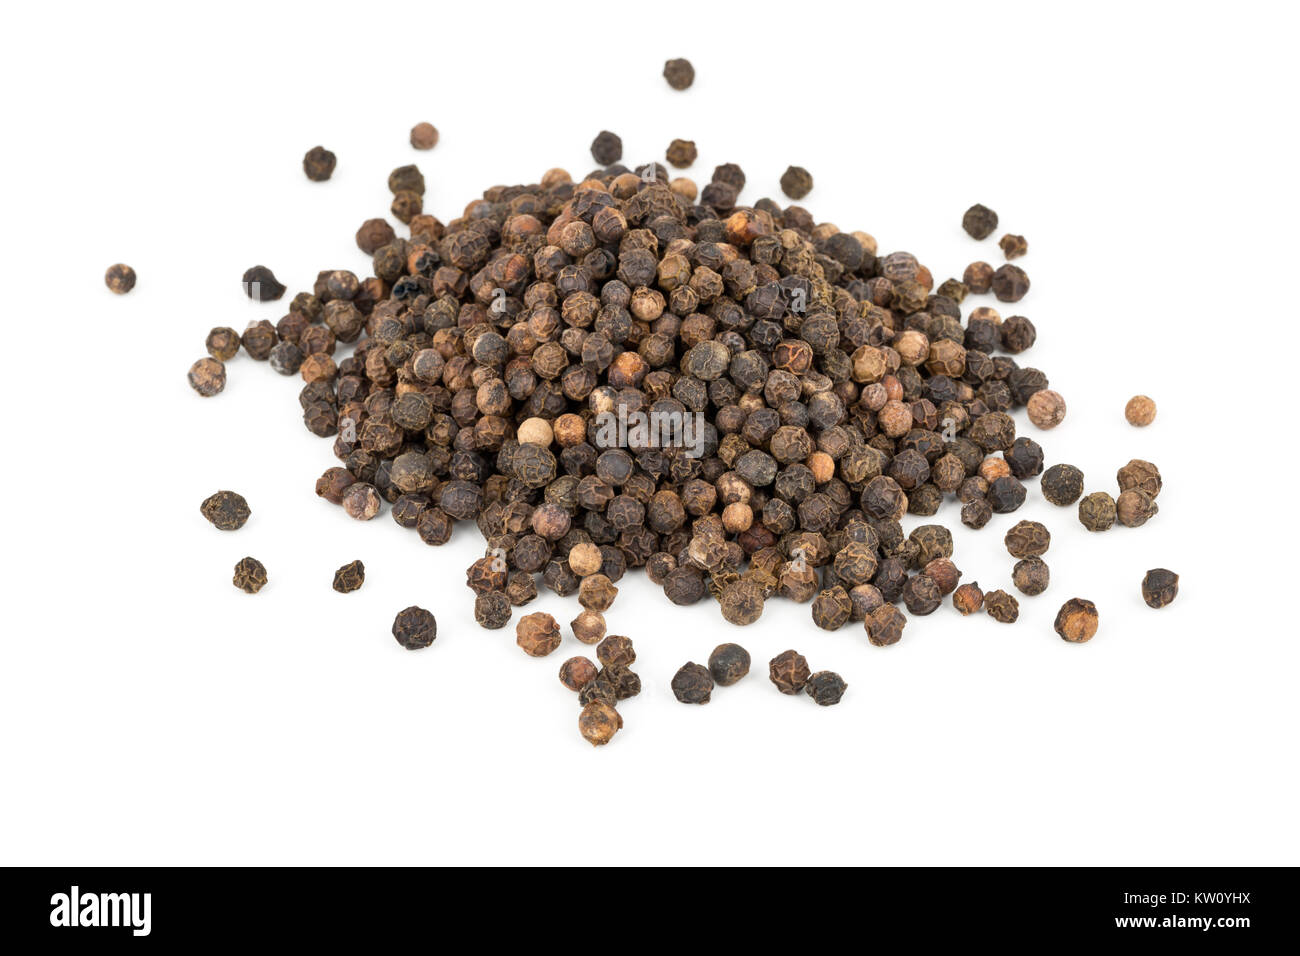 Heap of raw, natural, unprocessed black pepper peppercorns over white background Stock Photo